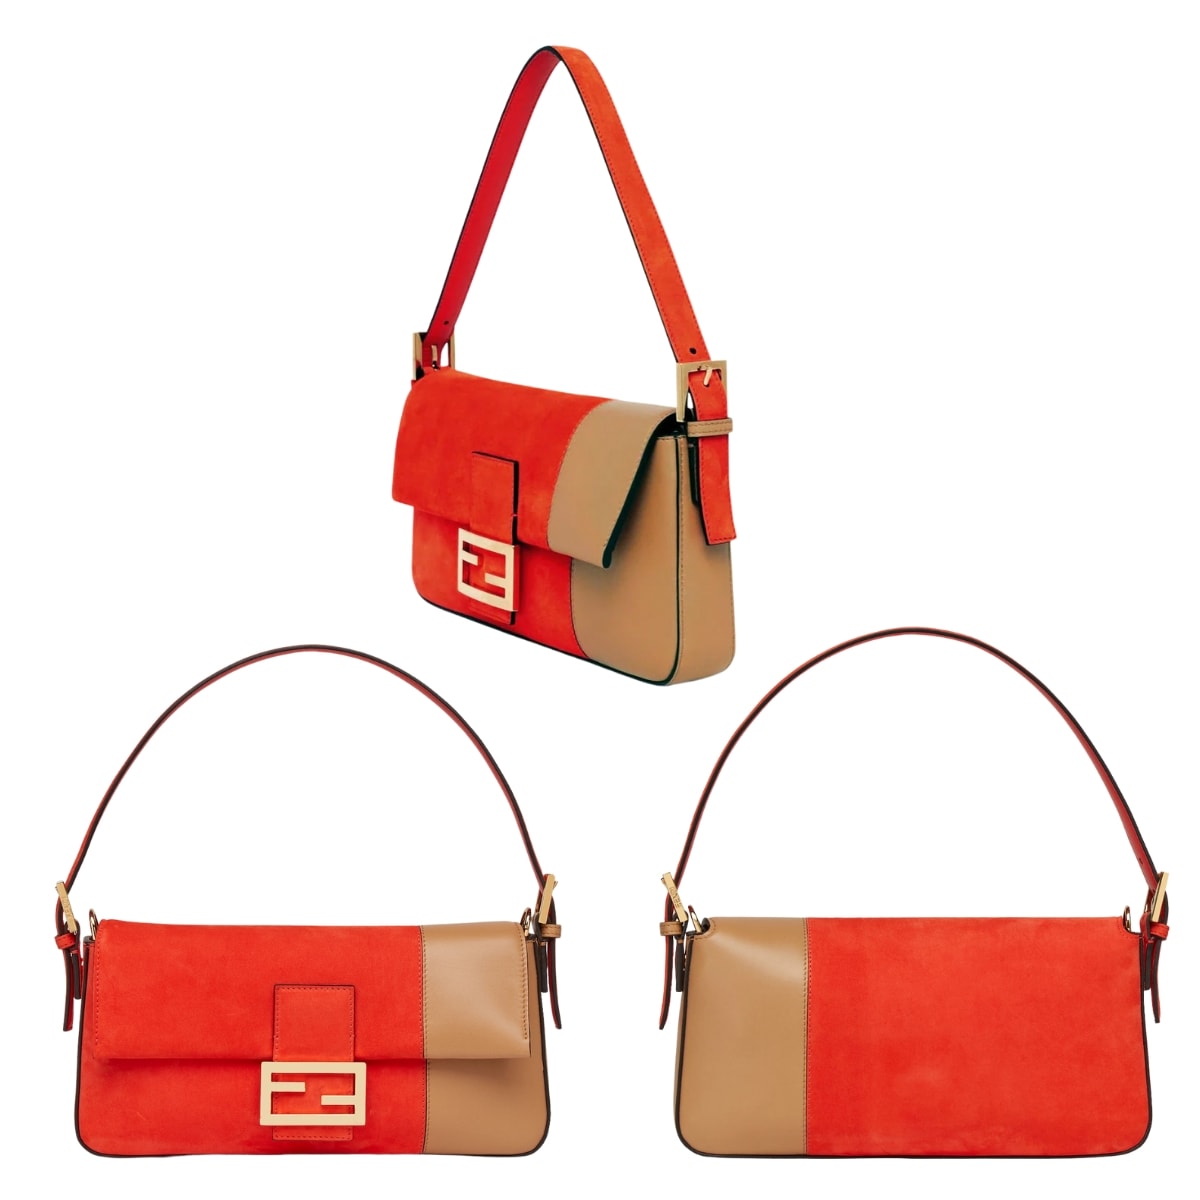 Fendi's medium Baguette 1997 bag made of red suede and beige leather is decorated with an FF clasp